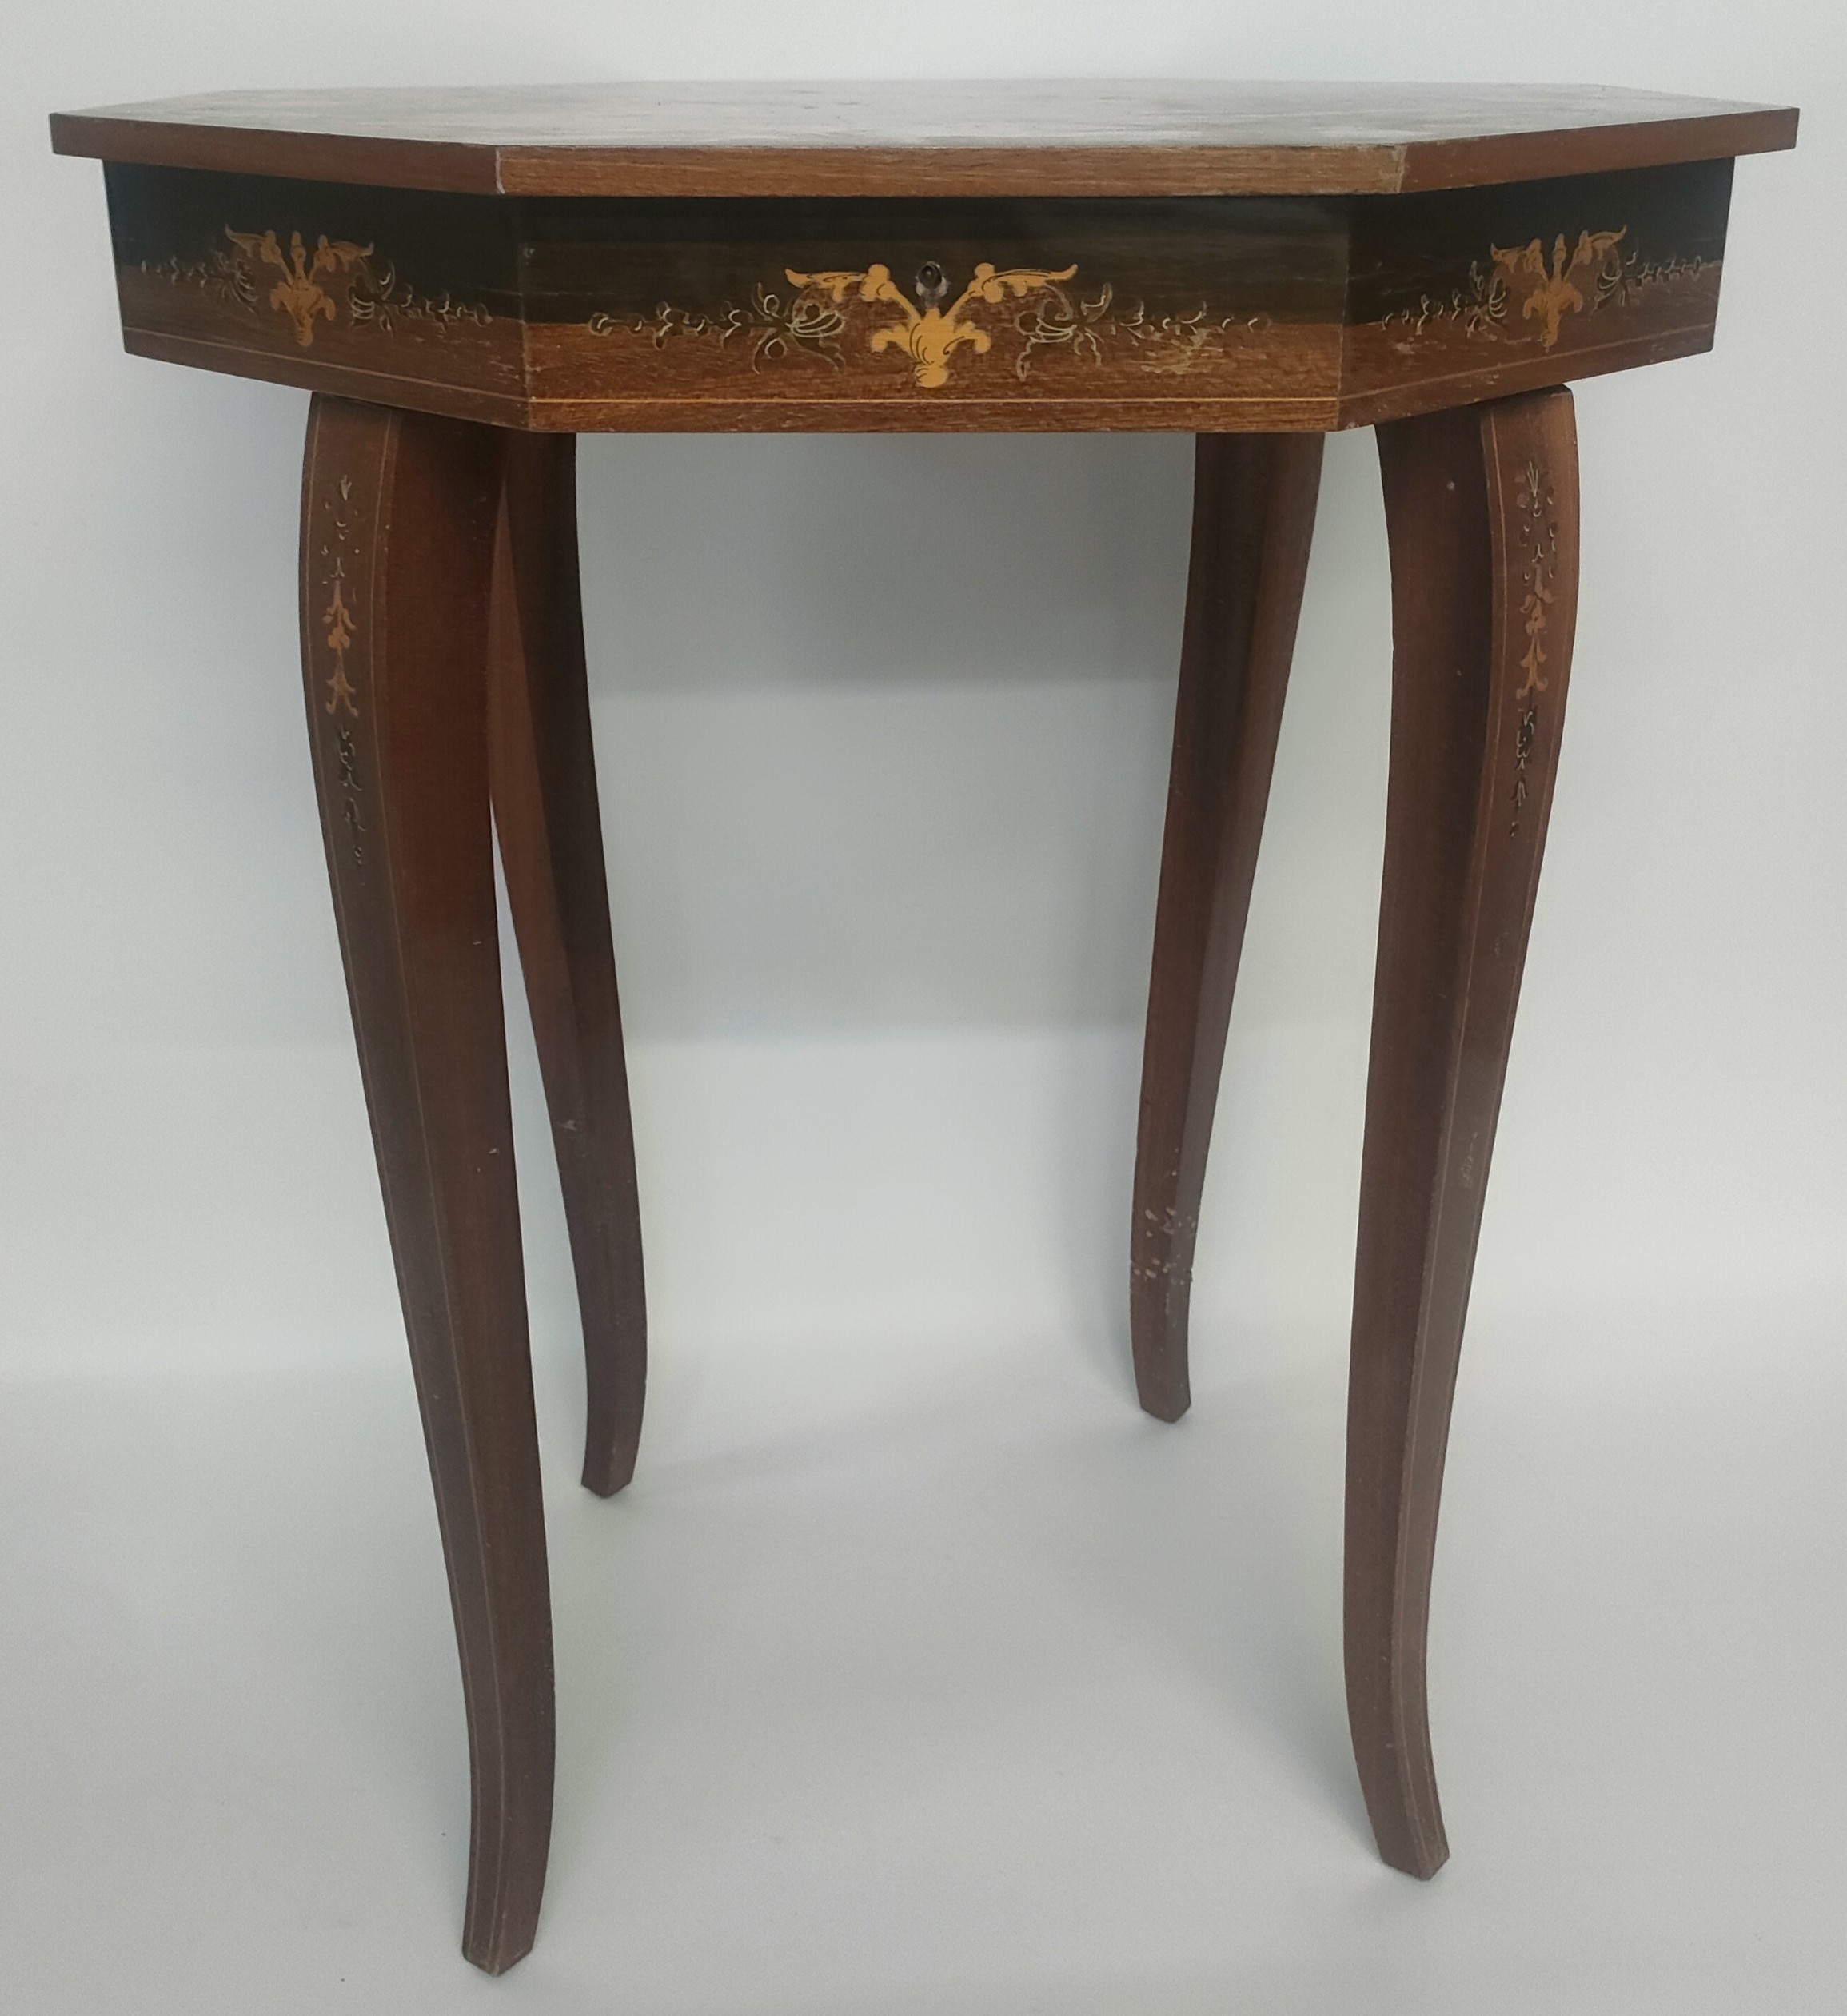 A vintage Italian inlaid music table [55x35x35cm] - Image 3 of 3